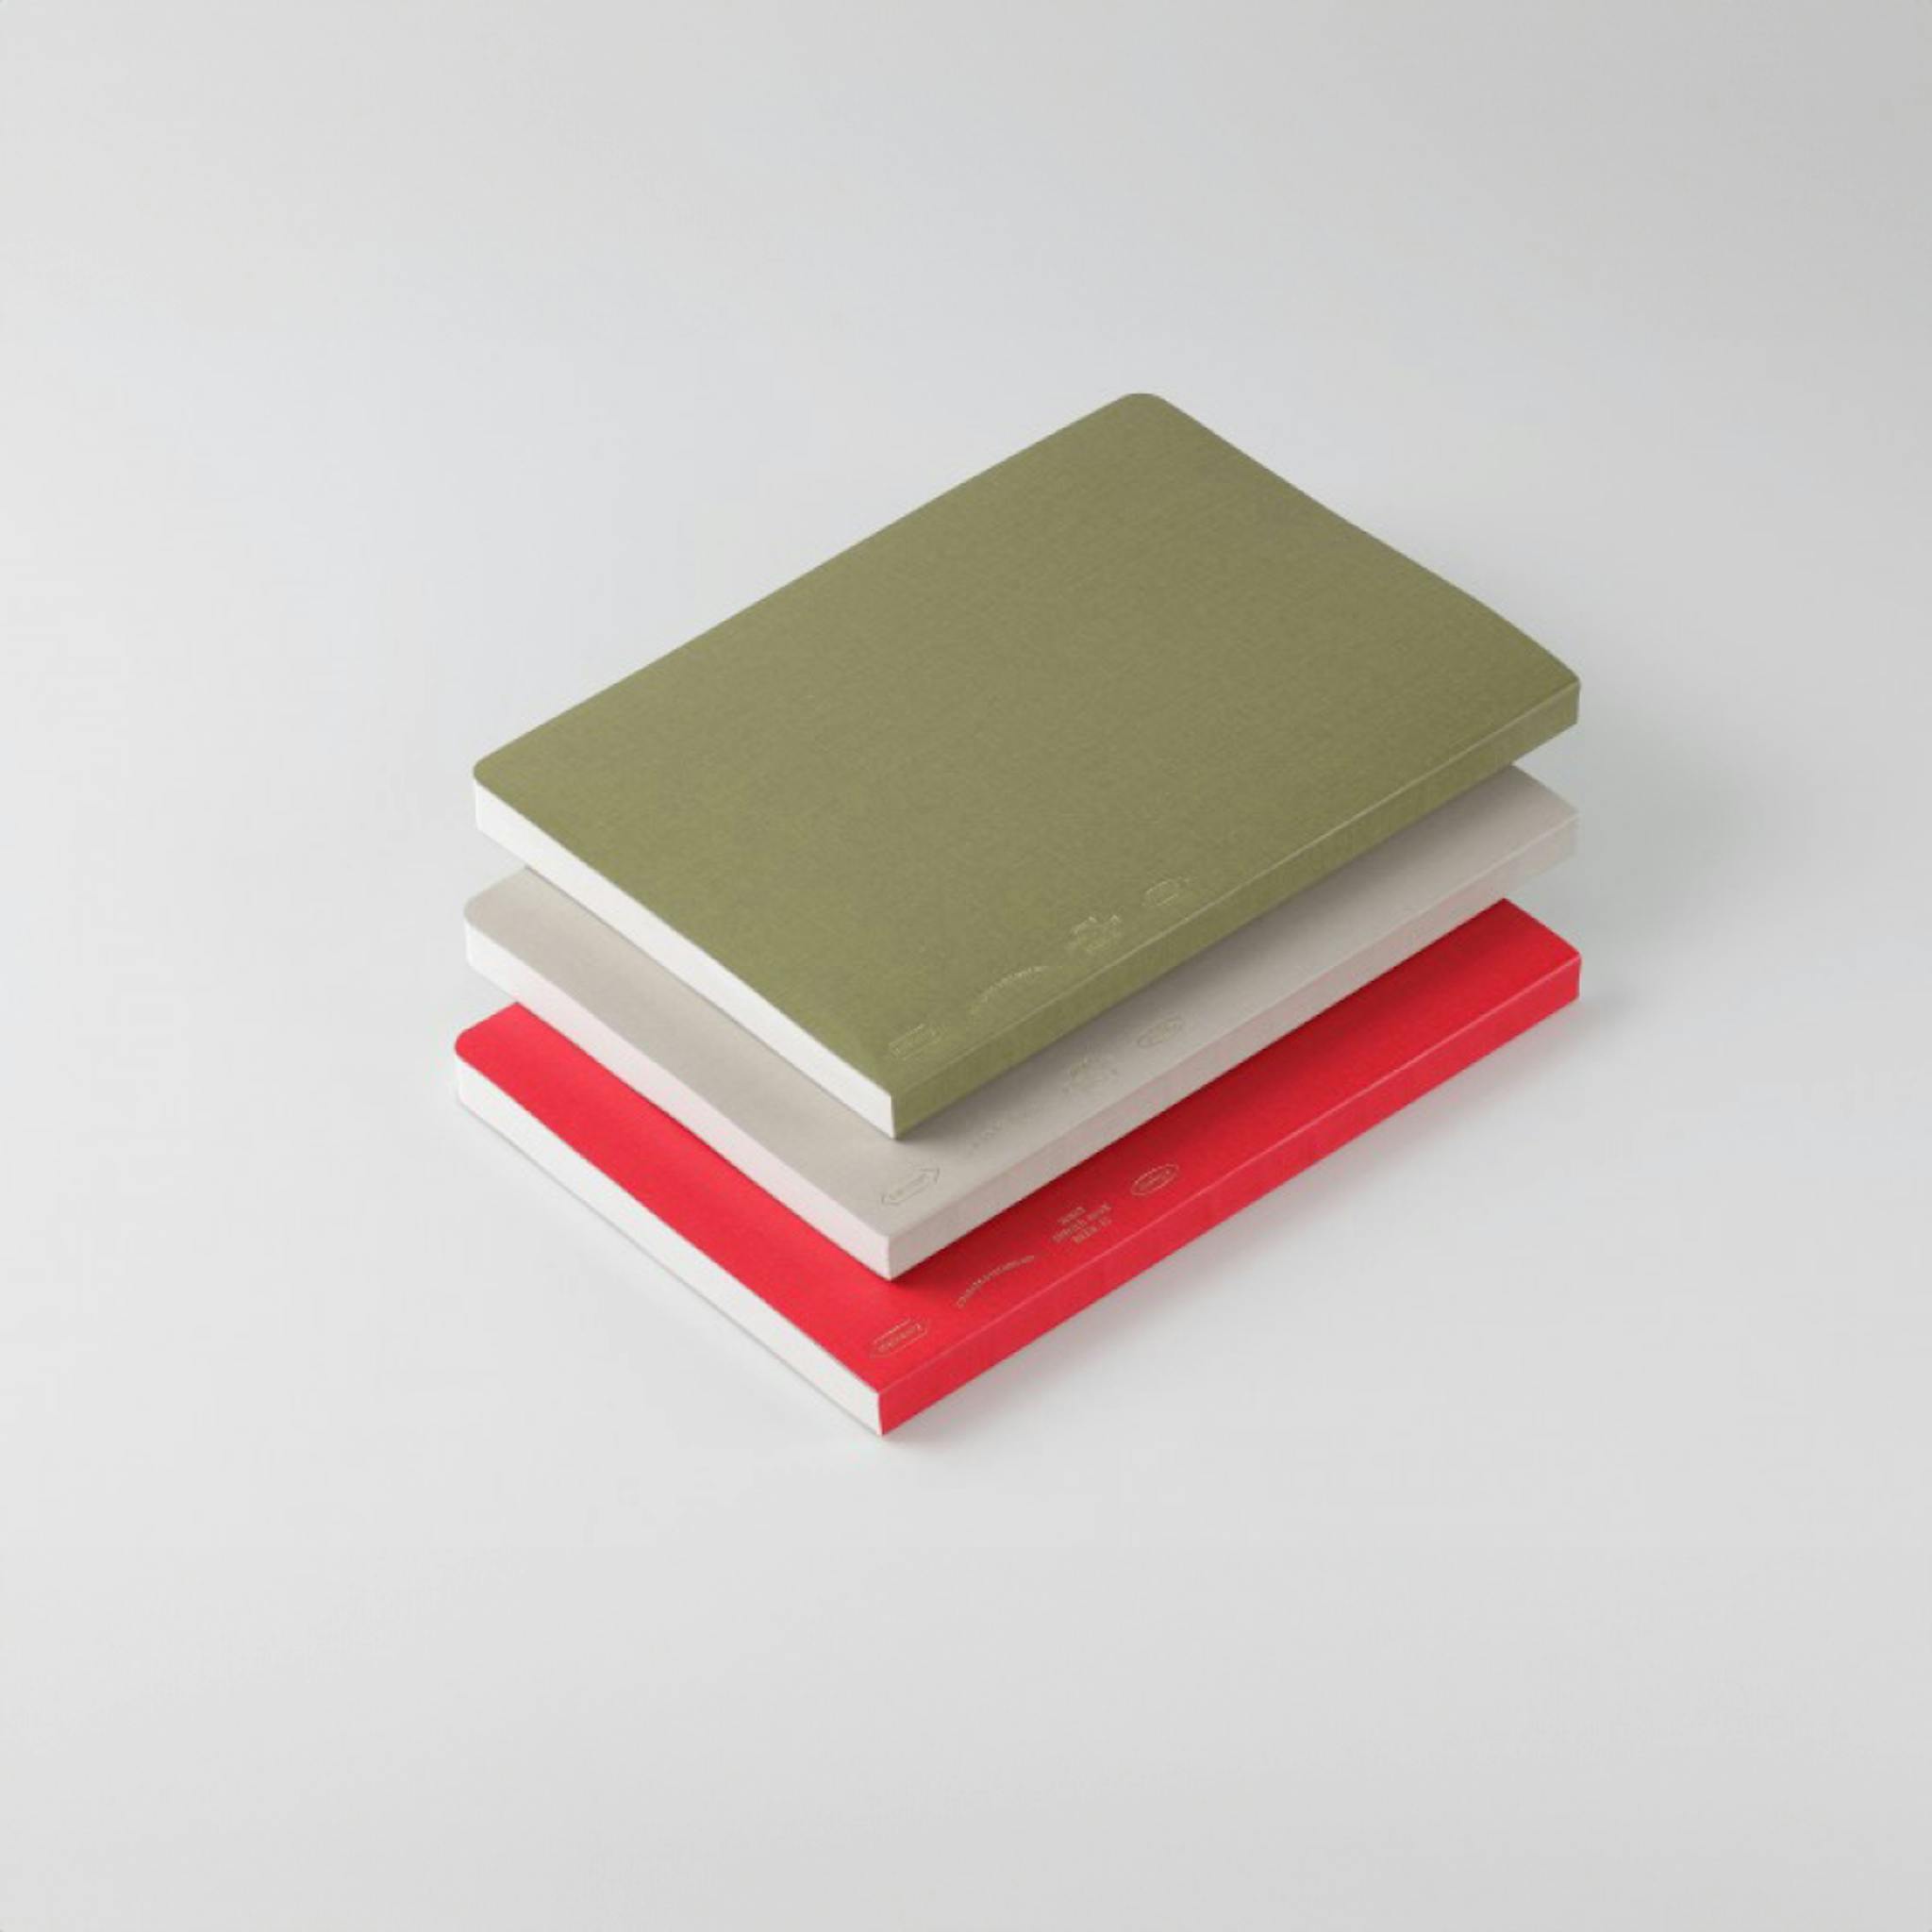 A stack of three notebooks. From top to bottom they are green, grey, and red. 